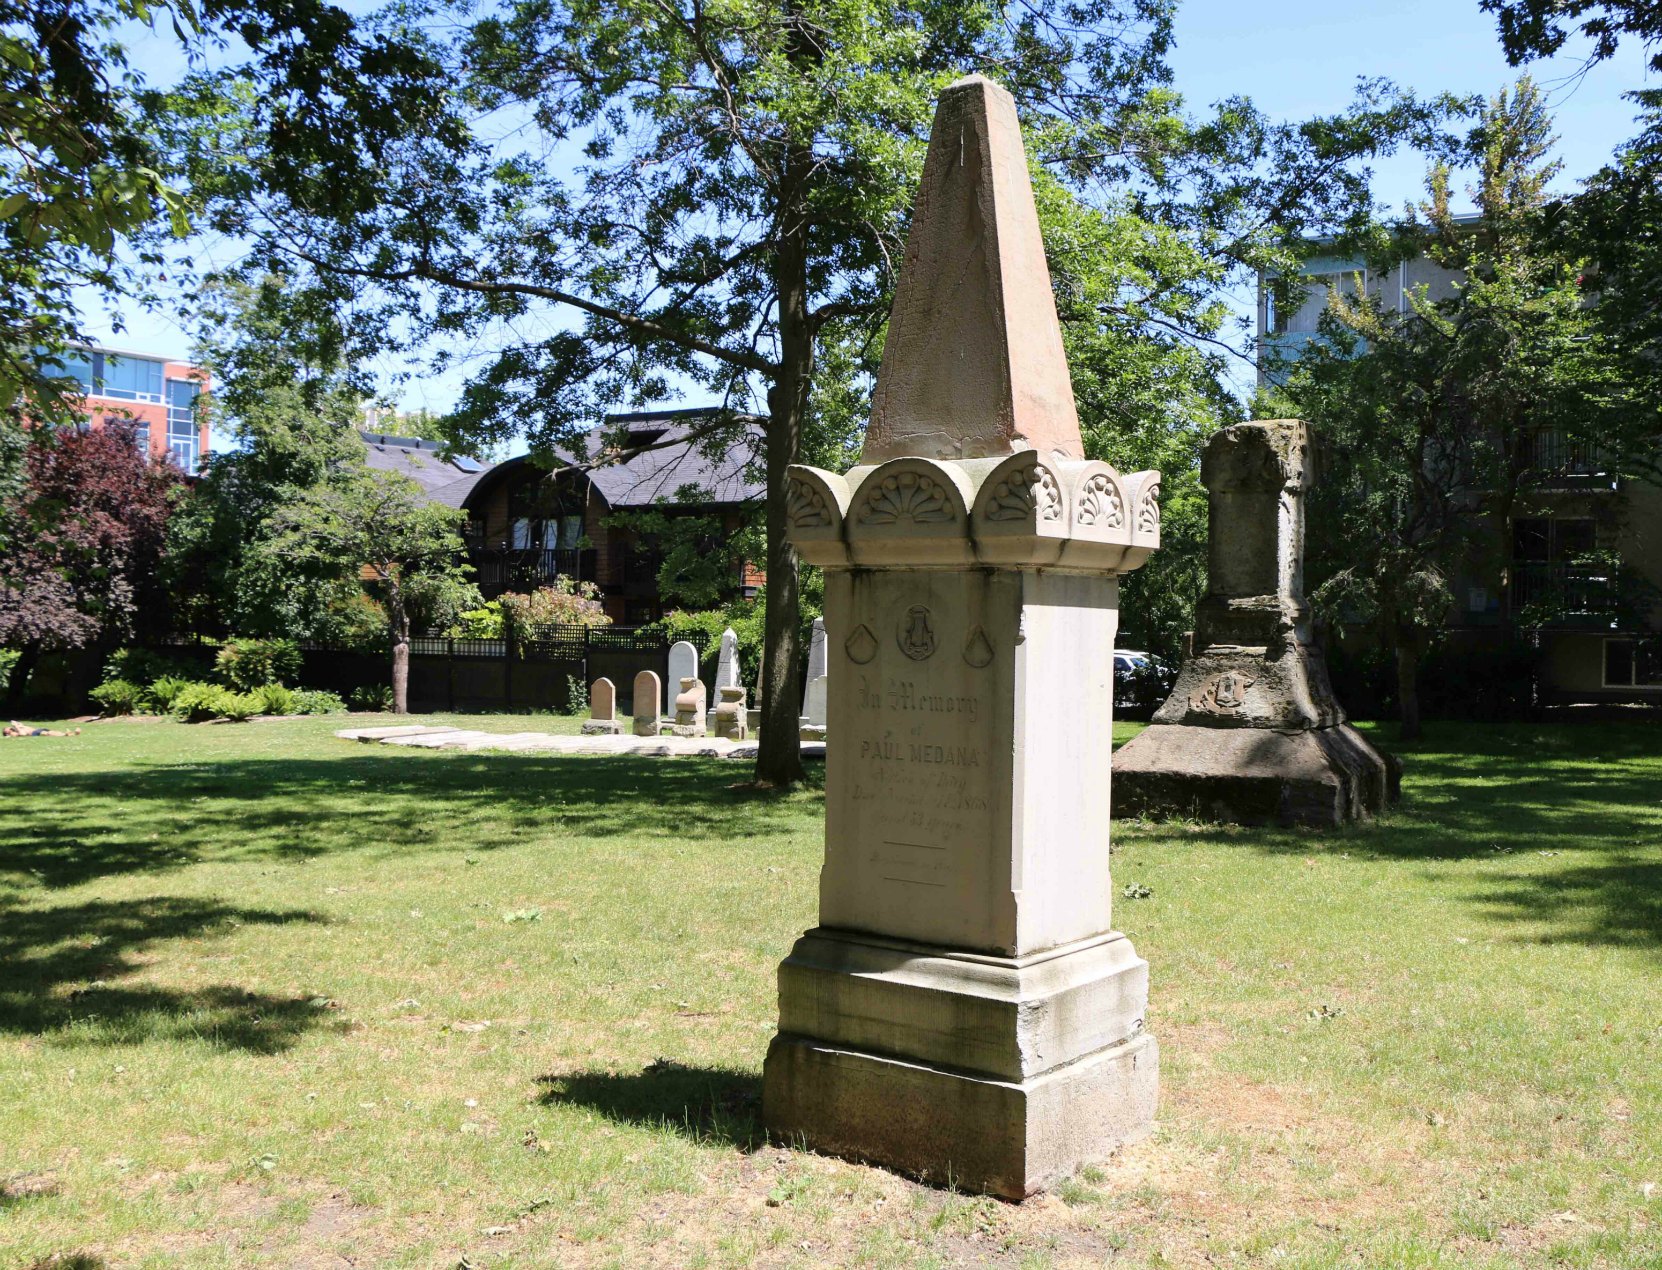 The grave of Paul Medana in Pioneer Square (photo by Victoria Online Sightseeing Tours)